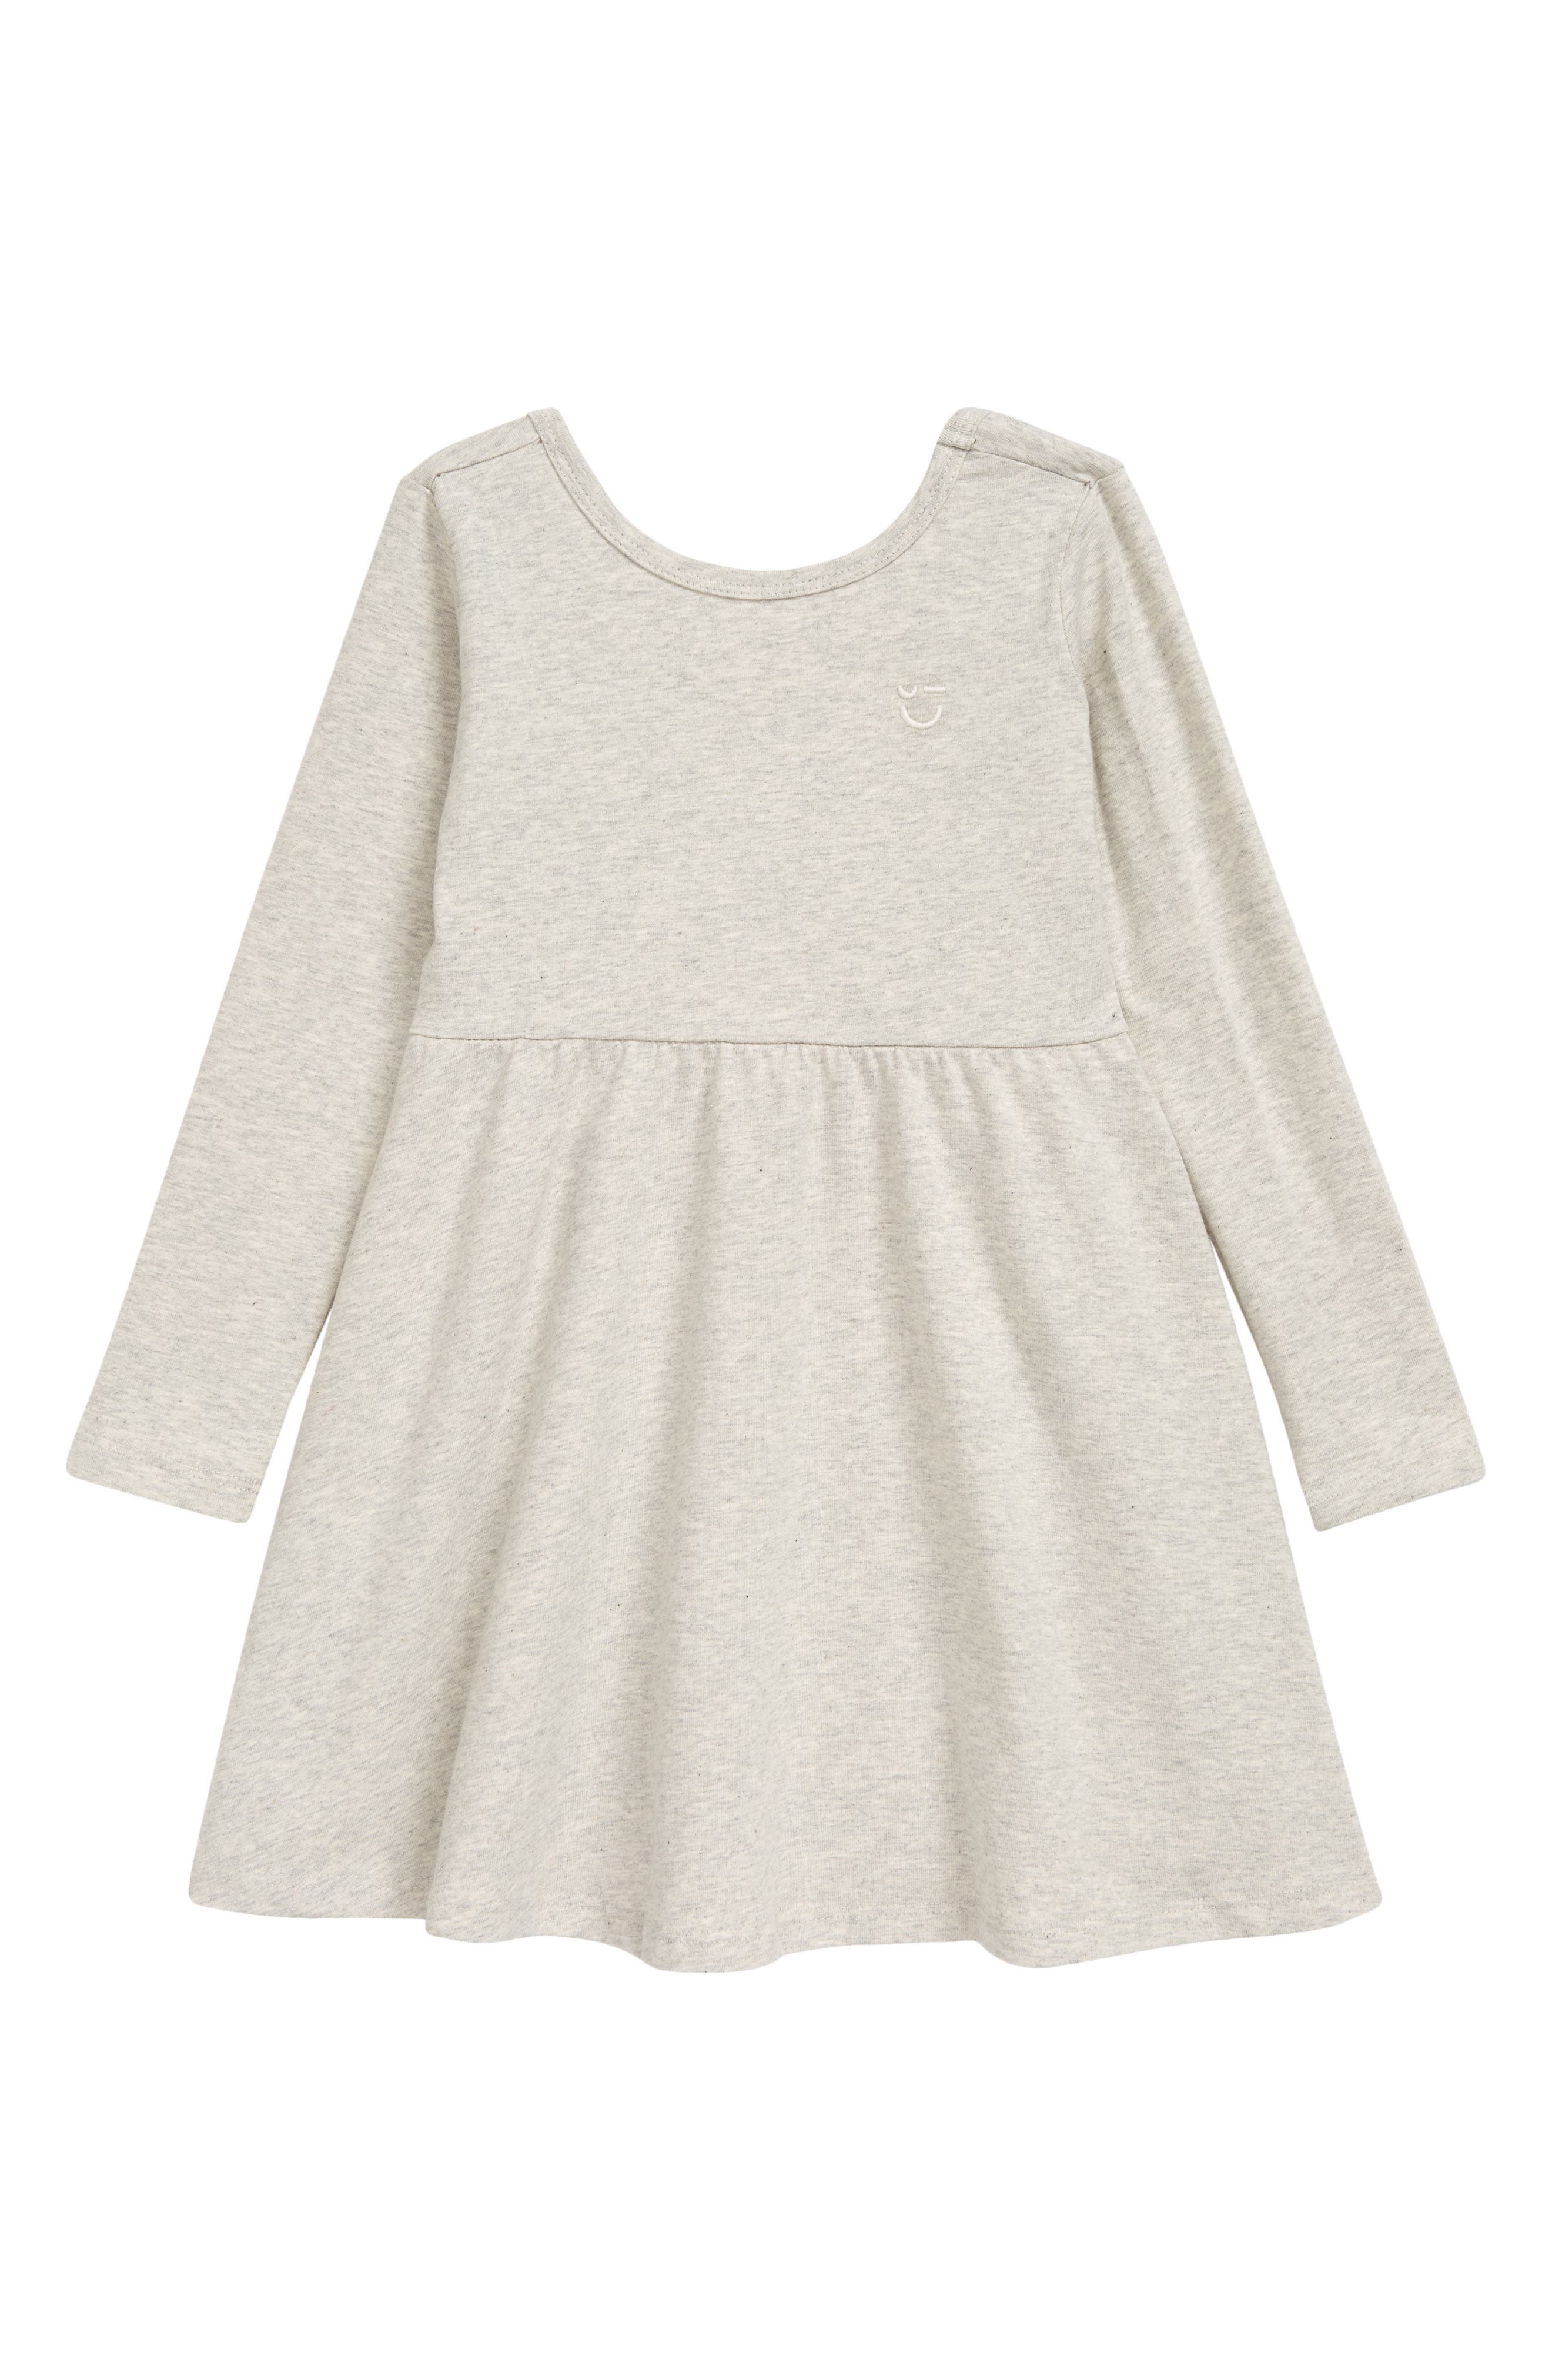 Nordstrom Clothing Dresses Long Sleeve Dresses Kids Star Long Sleeve Cotton Dress in Ice Grey at Nordstrom 